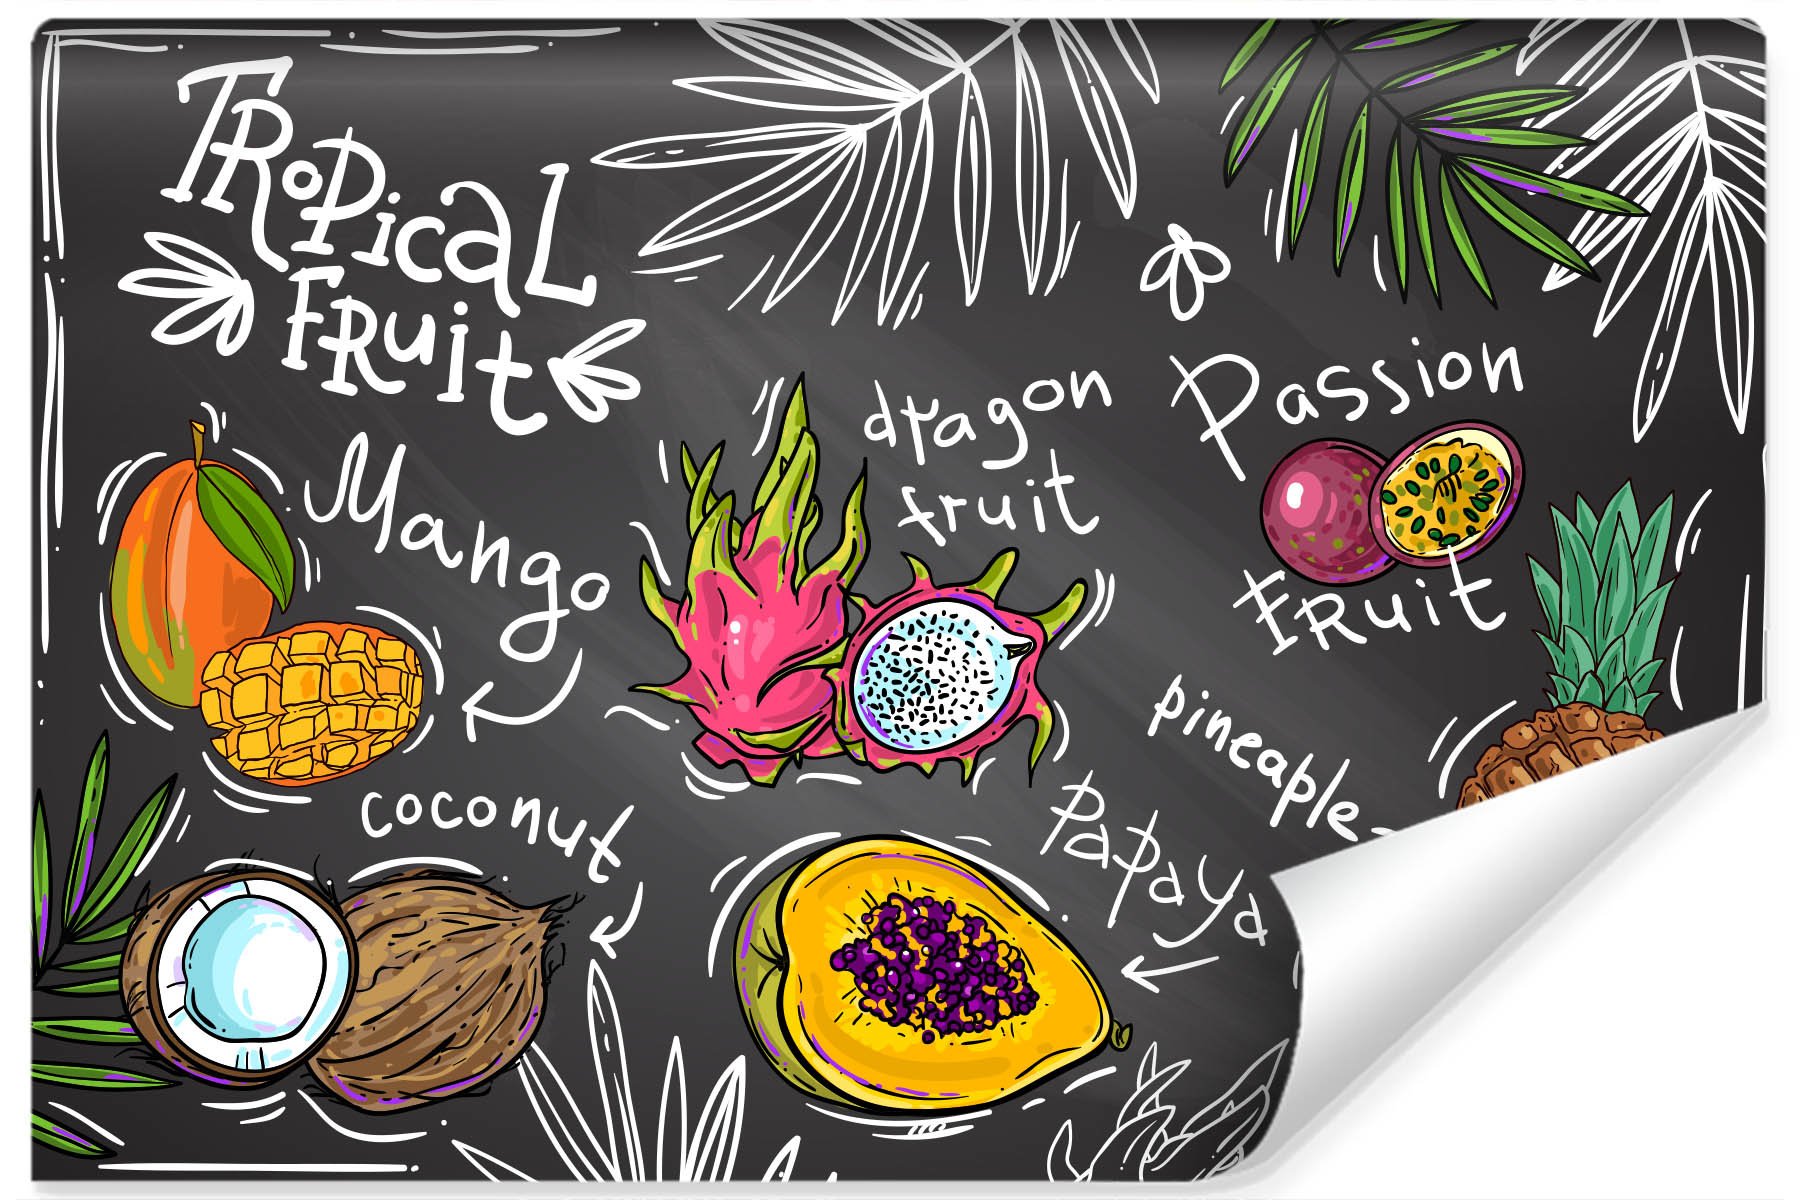 Photo wallpaper Tropical Fruits with Inscriptions Non-woven 104 x 70.5 cm FT-3060-VEM